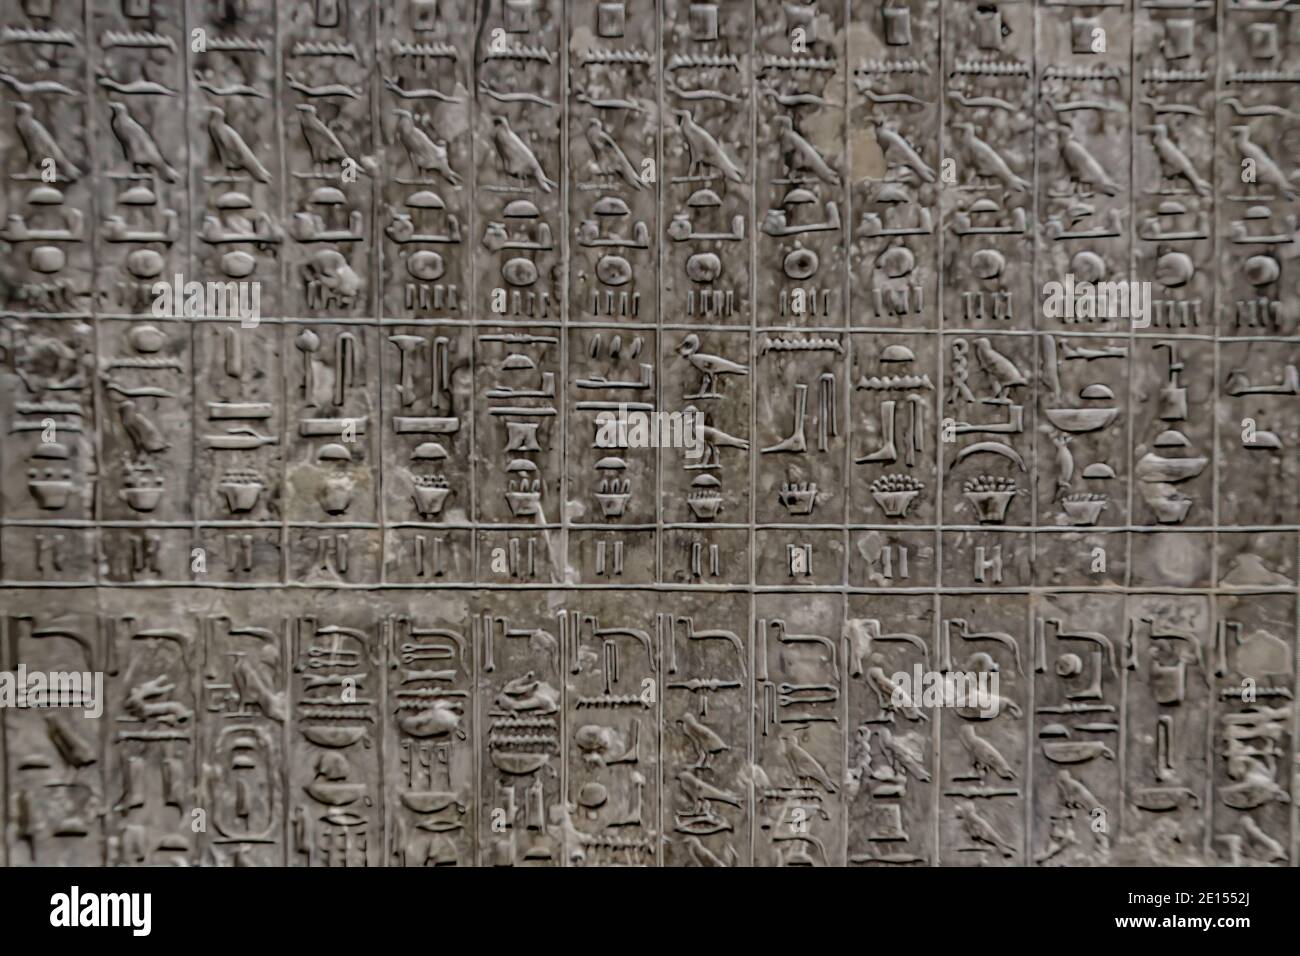 Extract from the 283 Pyramid Texts, spells for the king's afterlife, inscribed on the walls of the subterranean chambers of the Pyramid of Unas Stock Photo